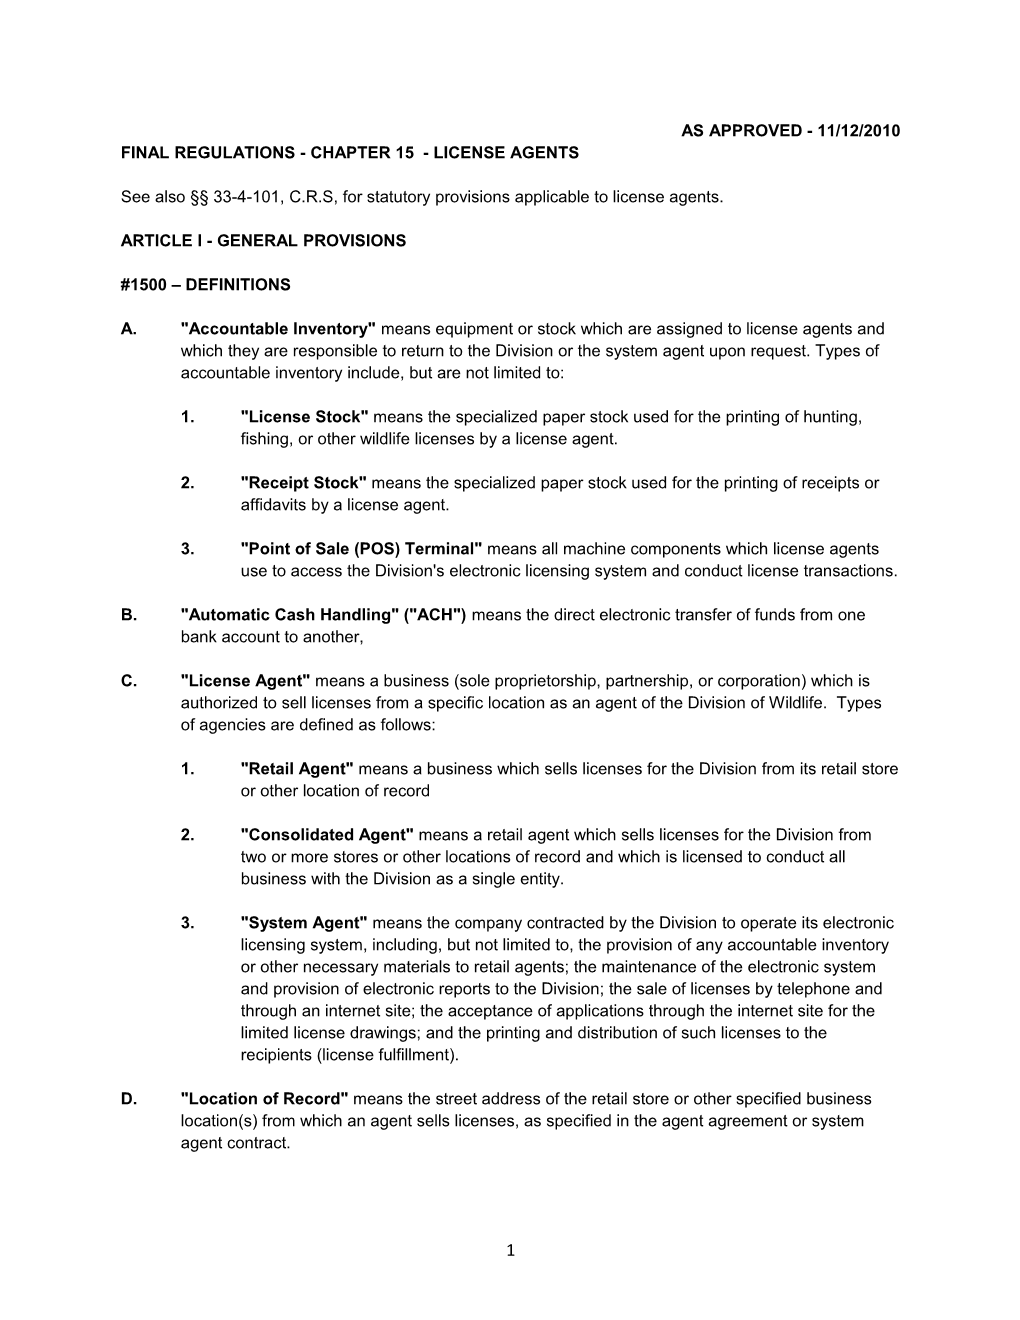 Final Regulations - Chapter 15 - License Agents